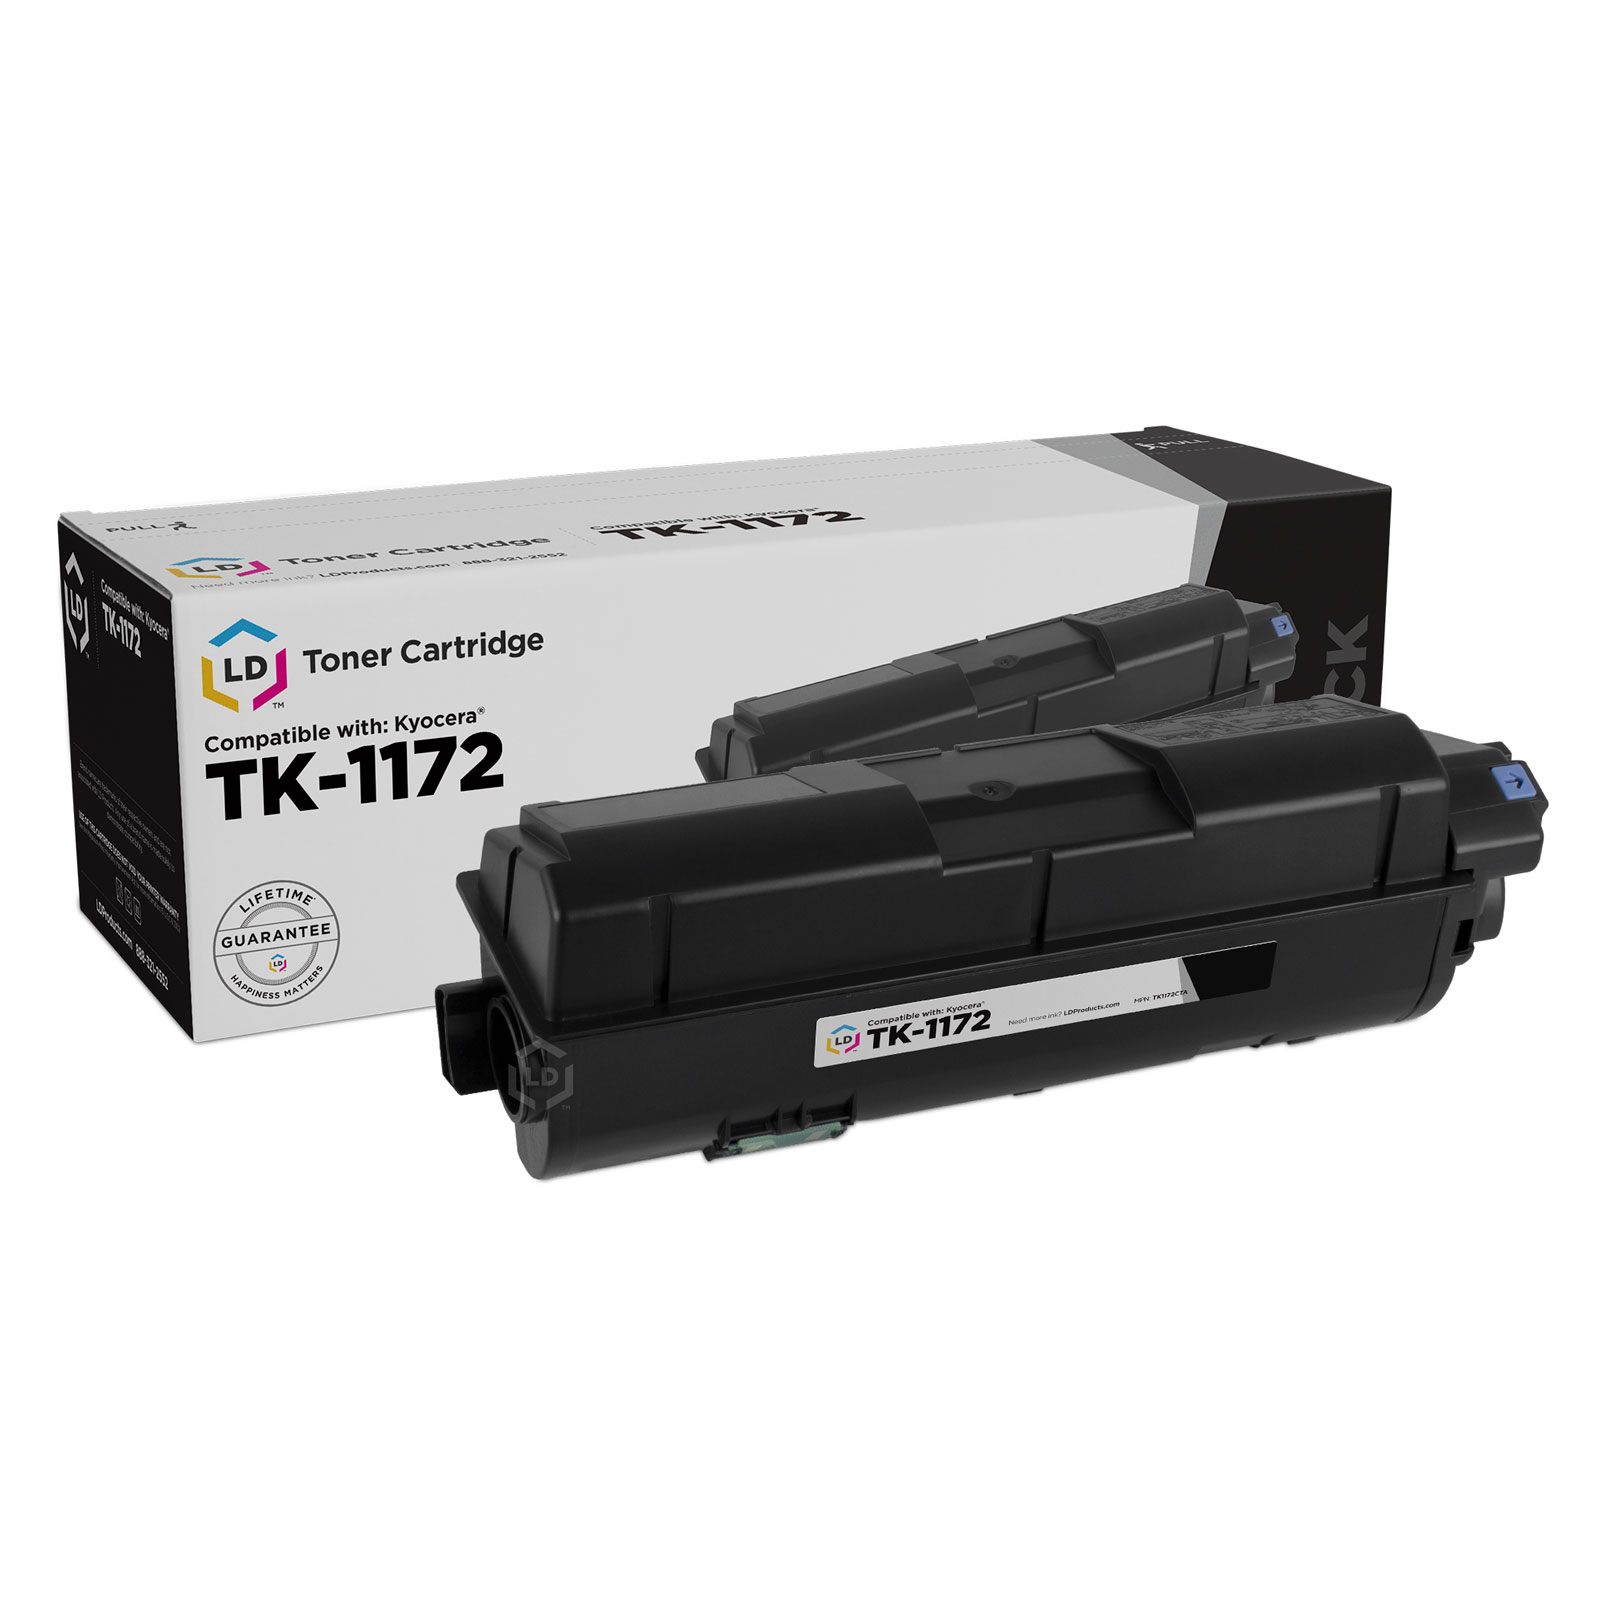 LD Compatible Replacement for Kyocera TK-1172 (1T02S50US0) Pack of 5 Black Laser Toner Cartridges for use in M2040dn, M2540d, M2540dw & M2640idw - image 2 of 2